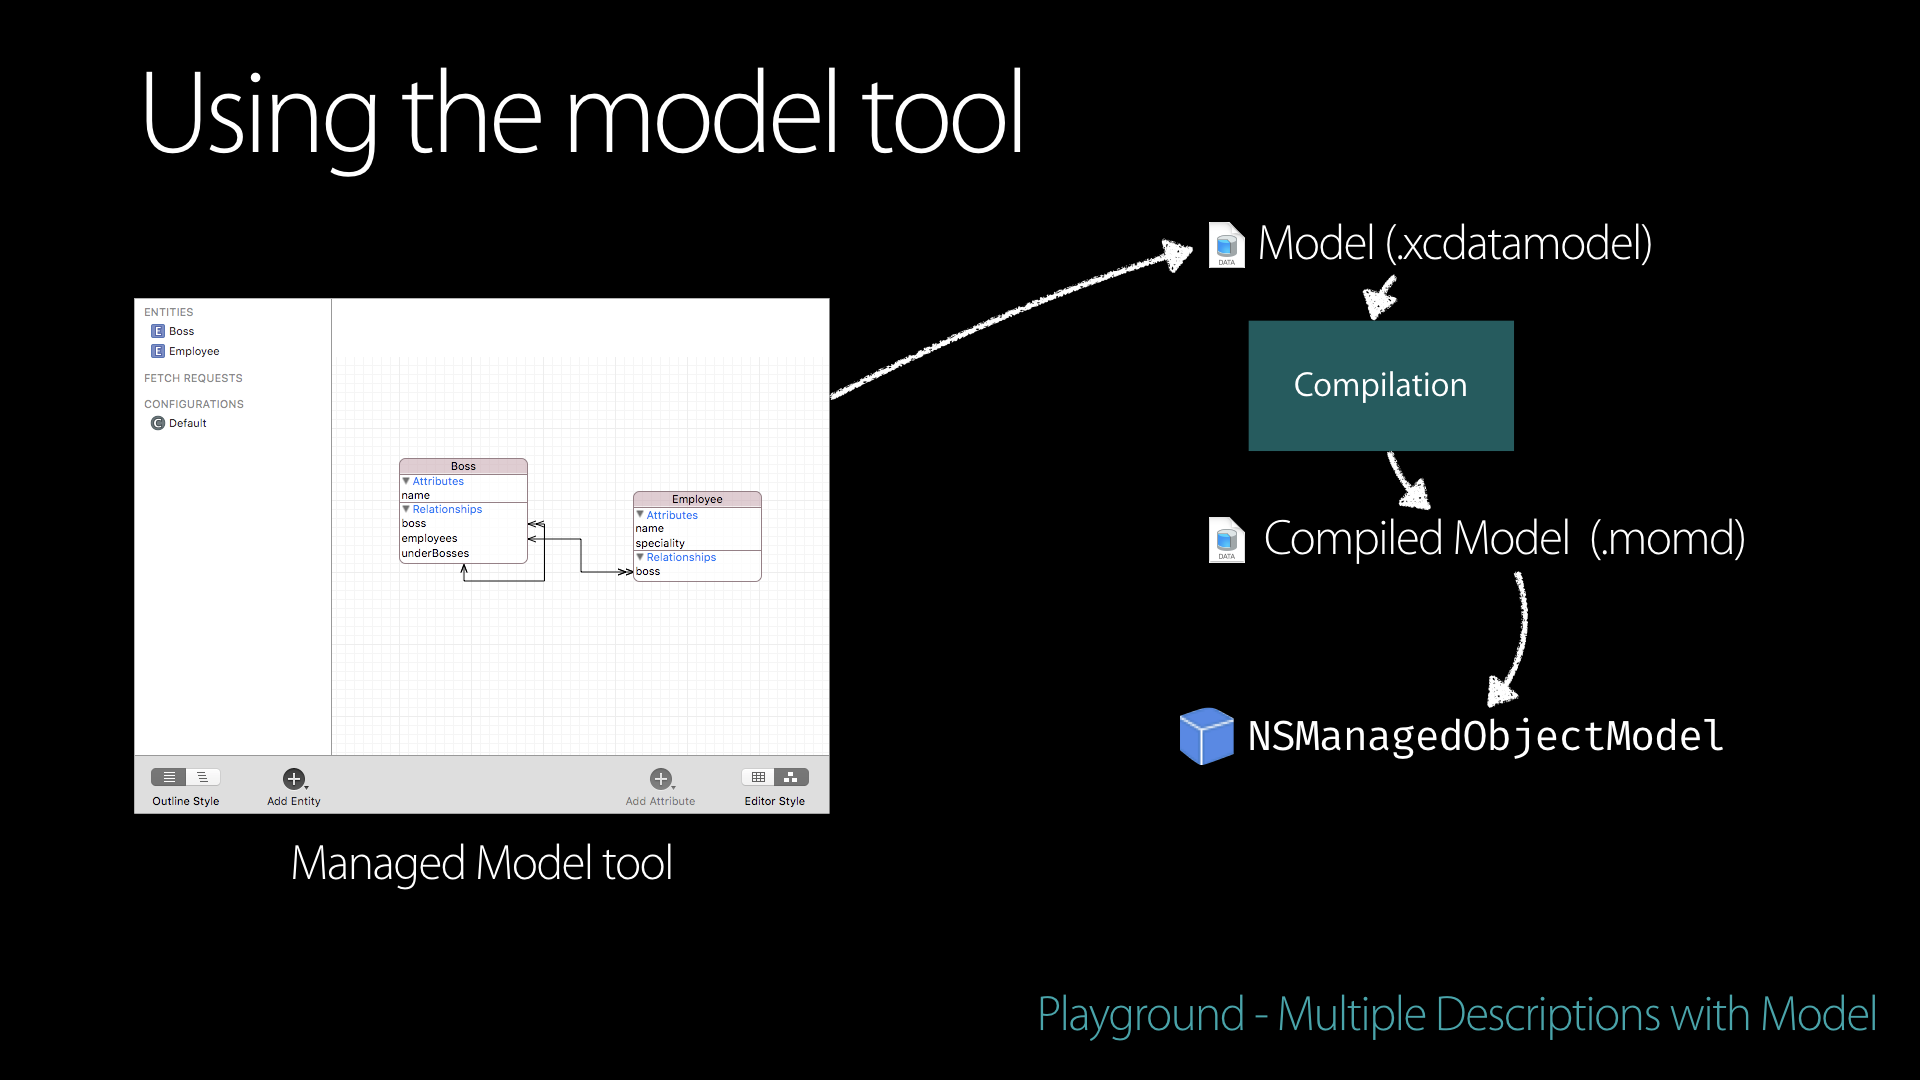 The Managed Object Model tool in Xcode